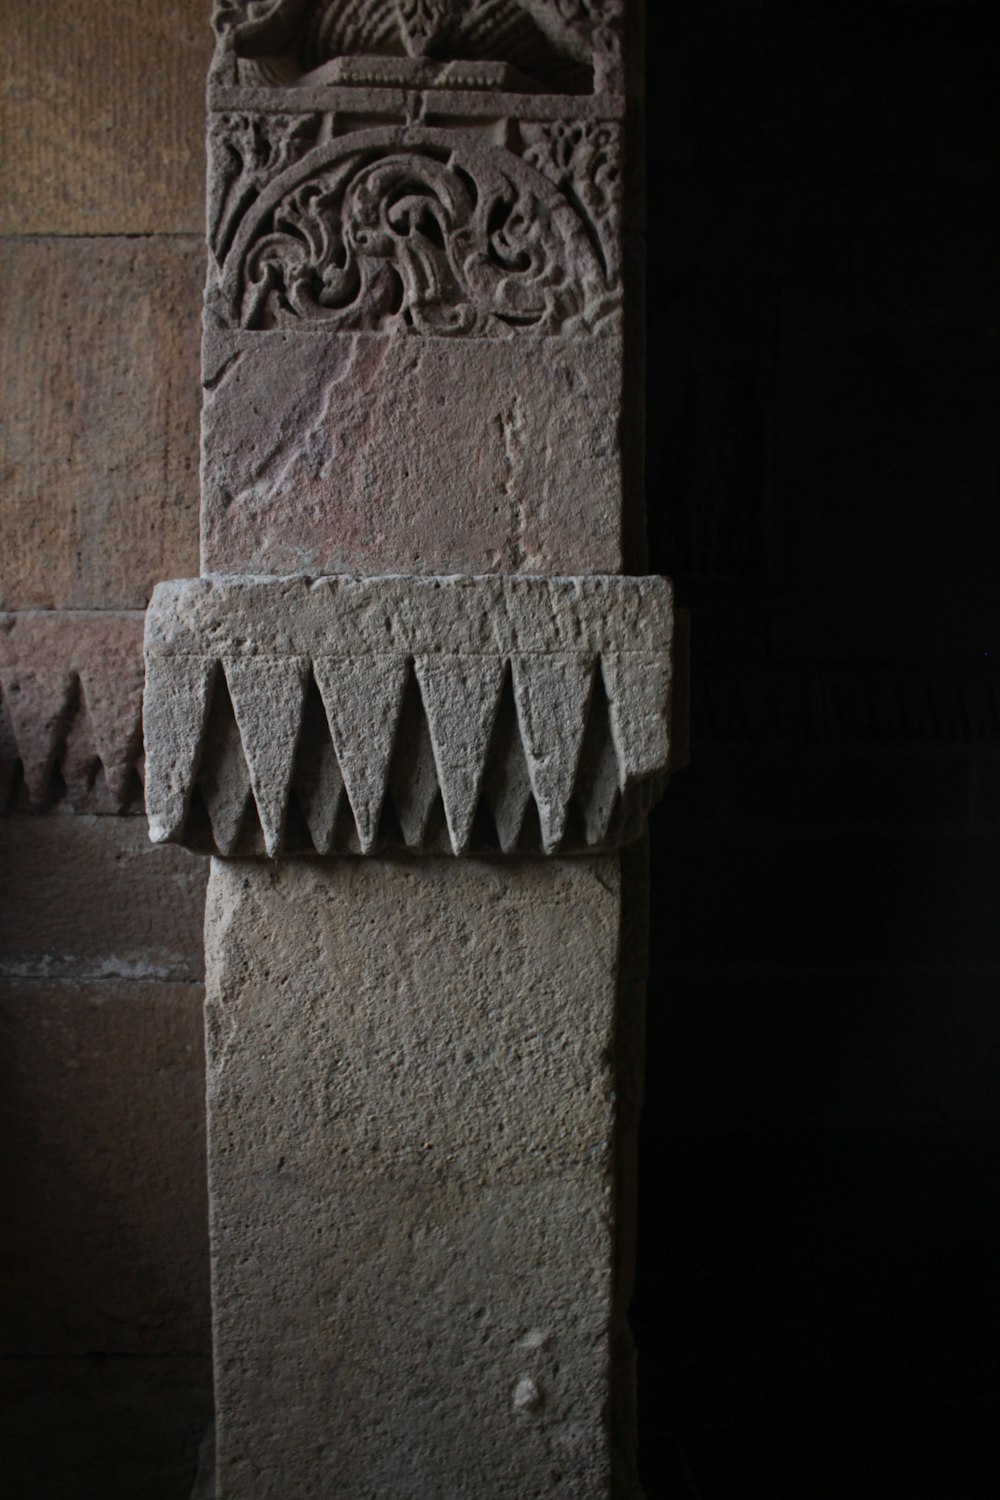 a close up of a stone pillar with carvings on it